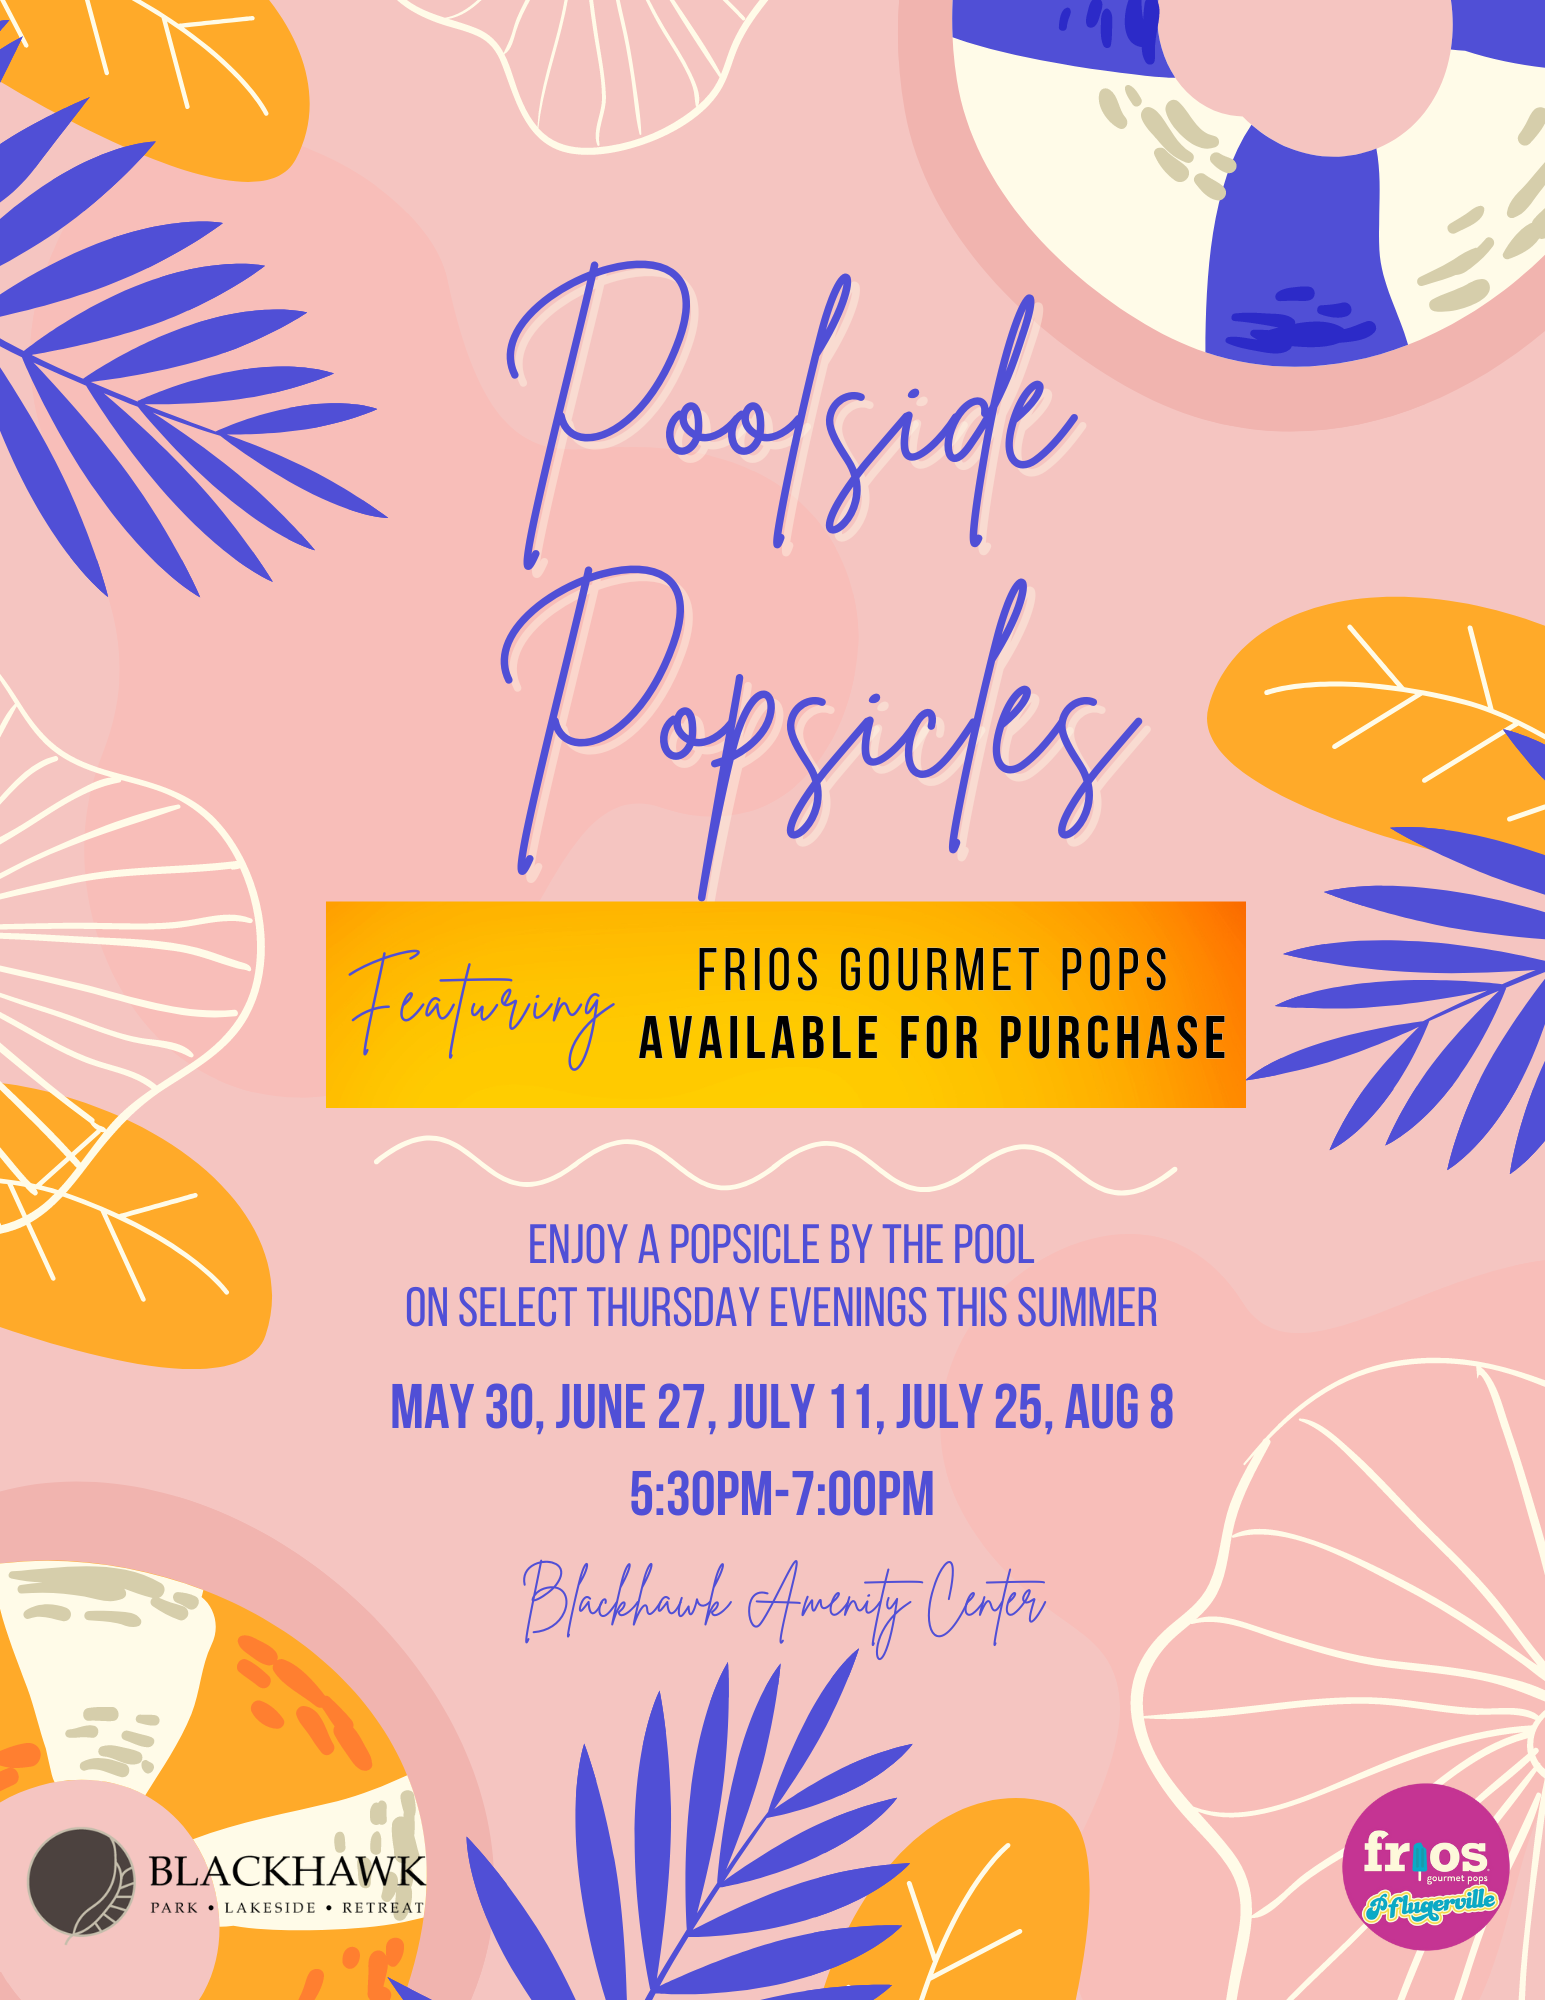 A flyer for "Poolside Popsicles" featuring a pastel background with tropical leaf designs and an image of a life preserver. The flyer provides event details and information about Frios Gourmet Pops available for purchase.